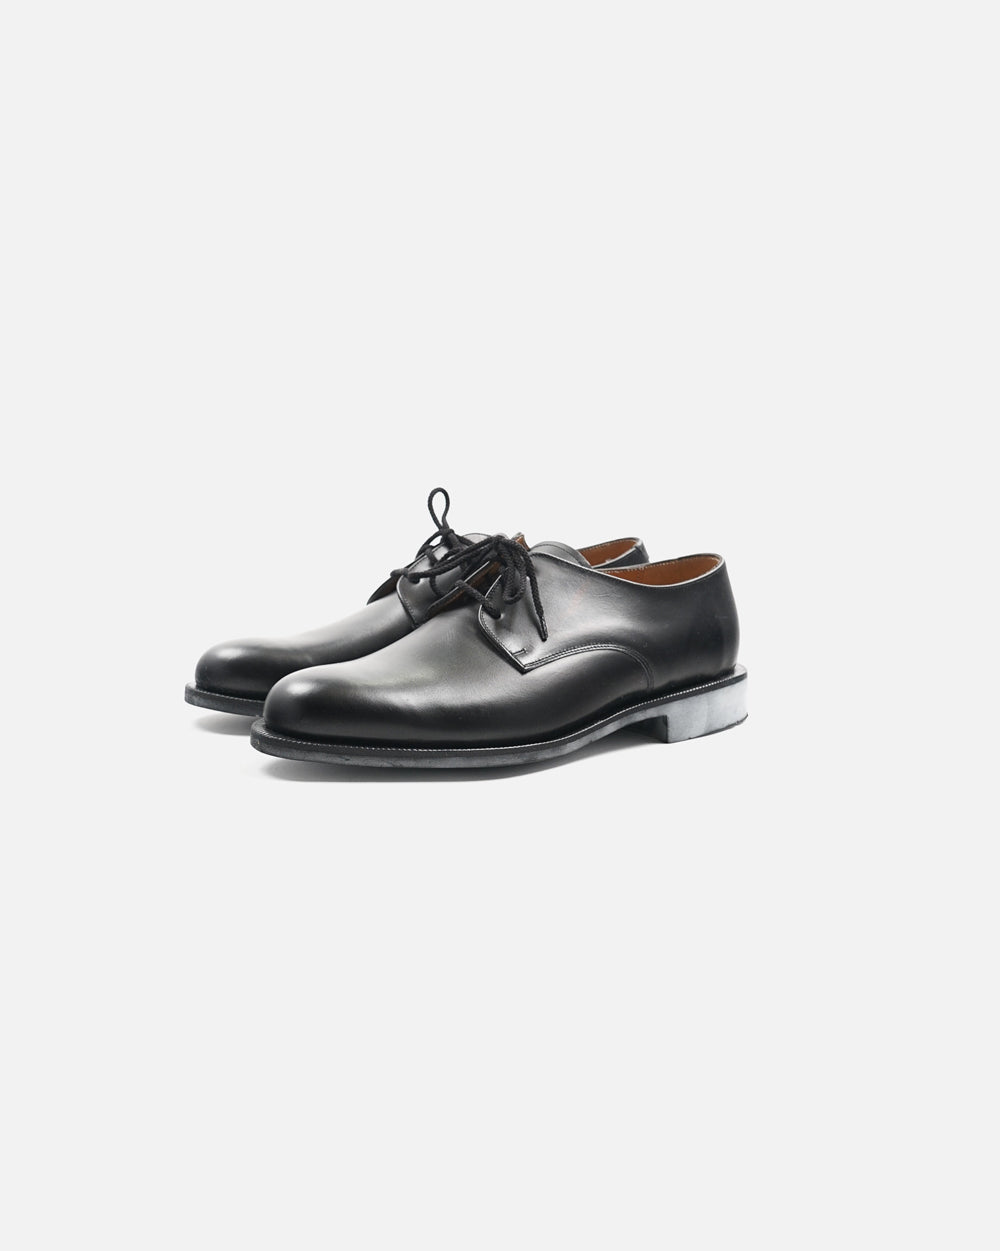 French Military Oxford Dress Shoes